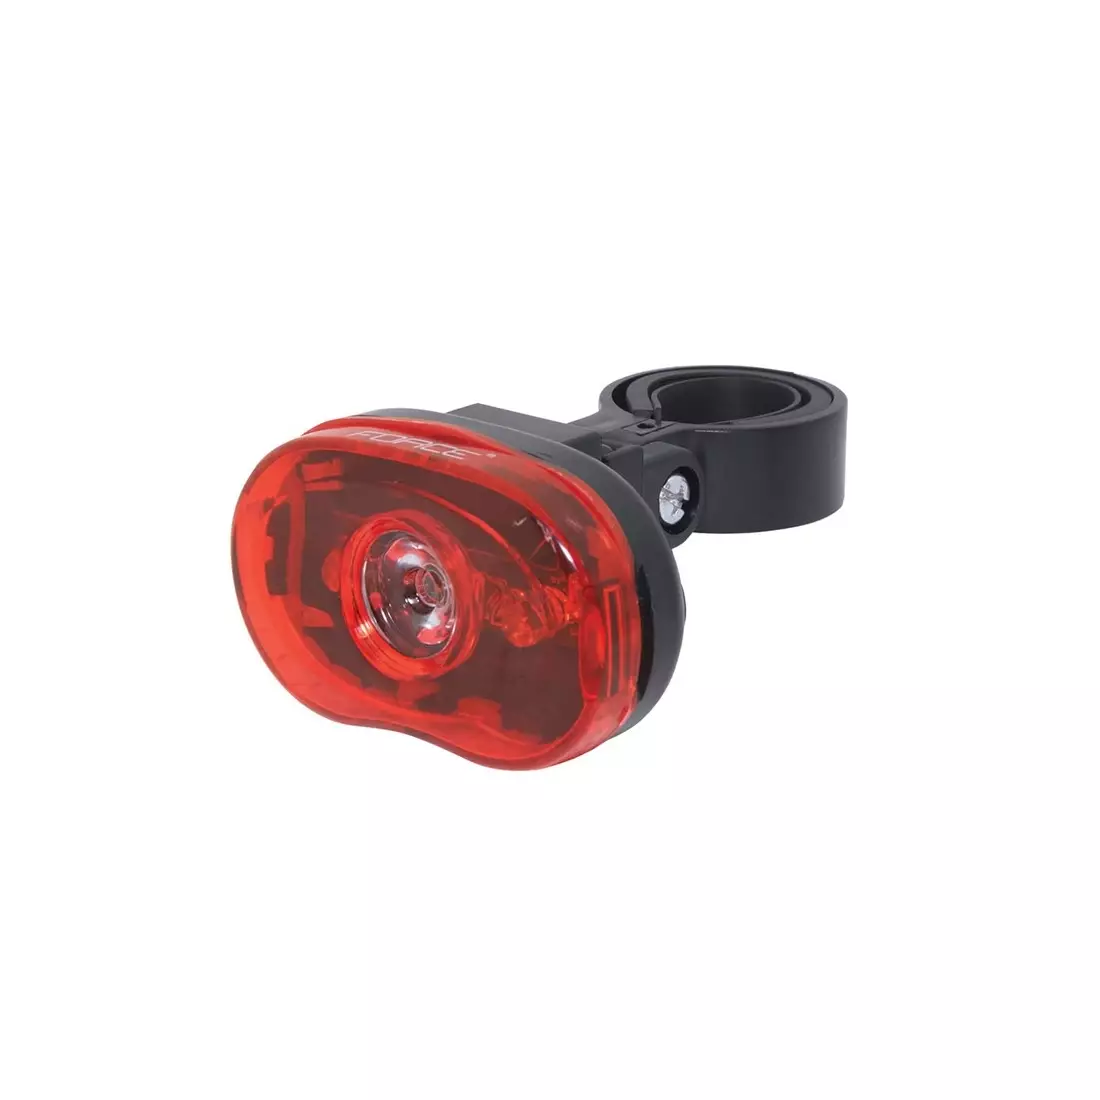 FORCE TWINKL 0,5W rear bicycle lamp